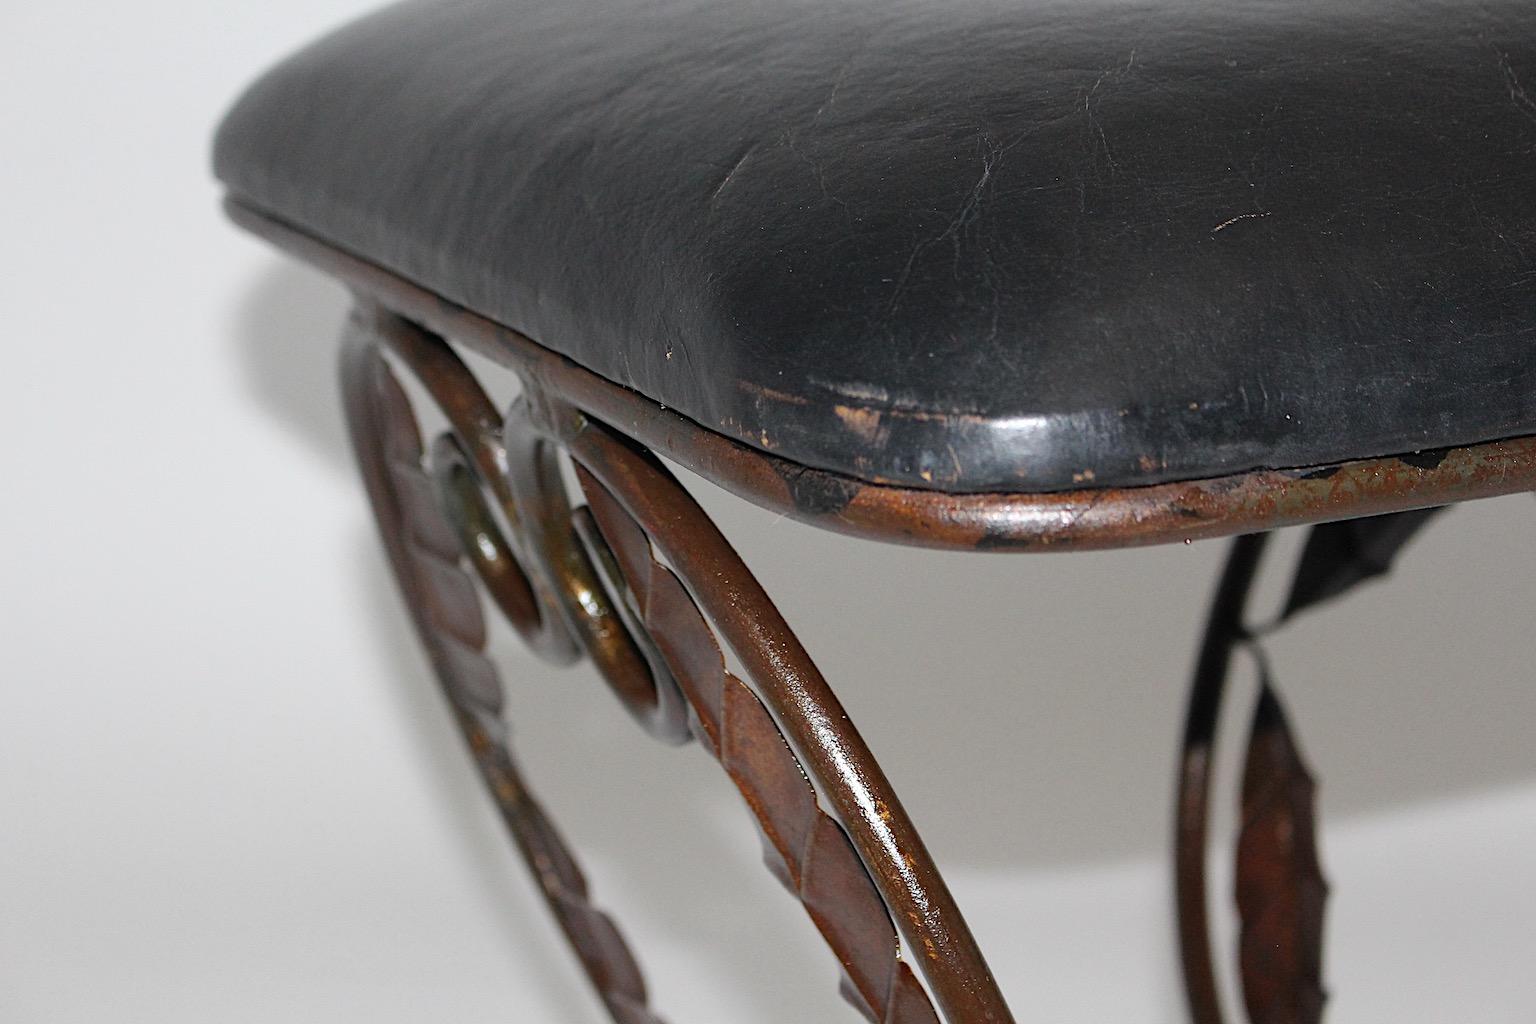 Vintage Brown Metal Stool Ottoman with Leaves Black Leather Seat, 1970s, France For Sale 2